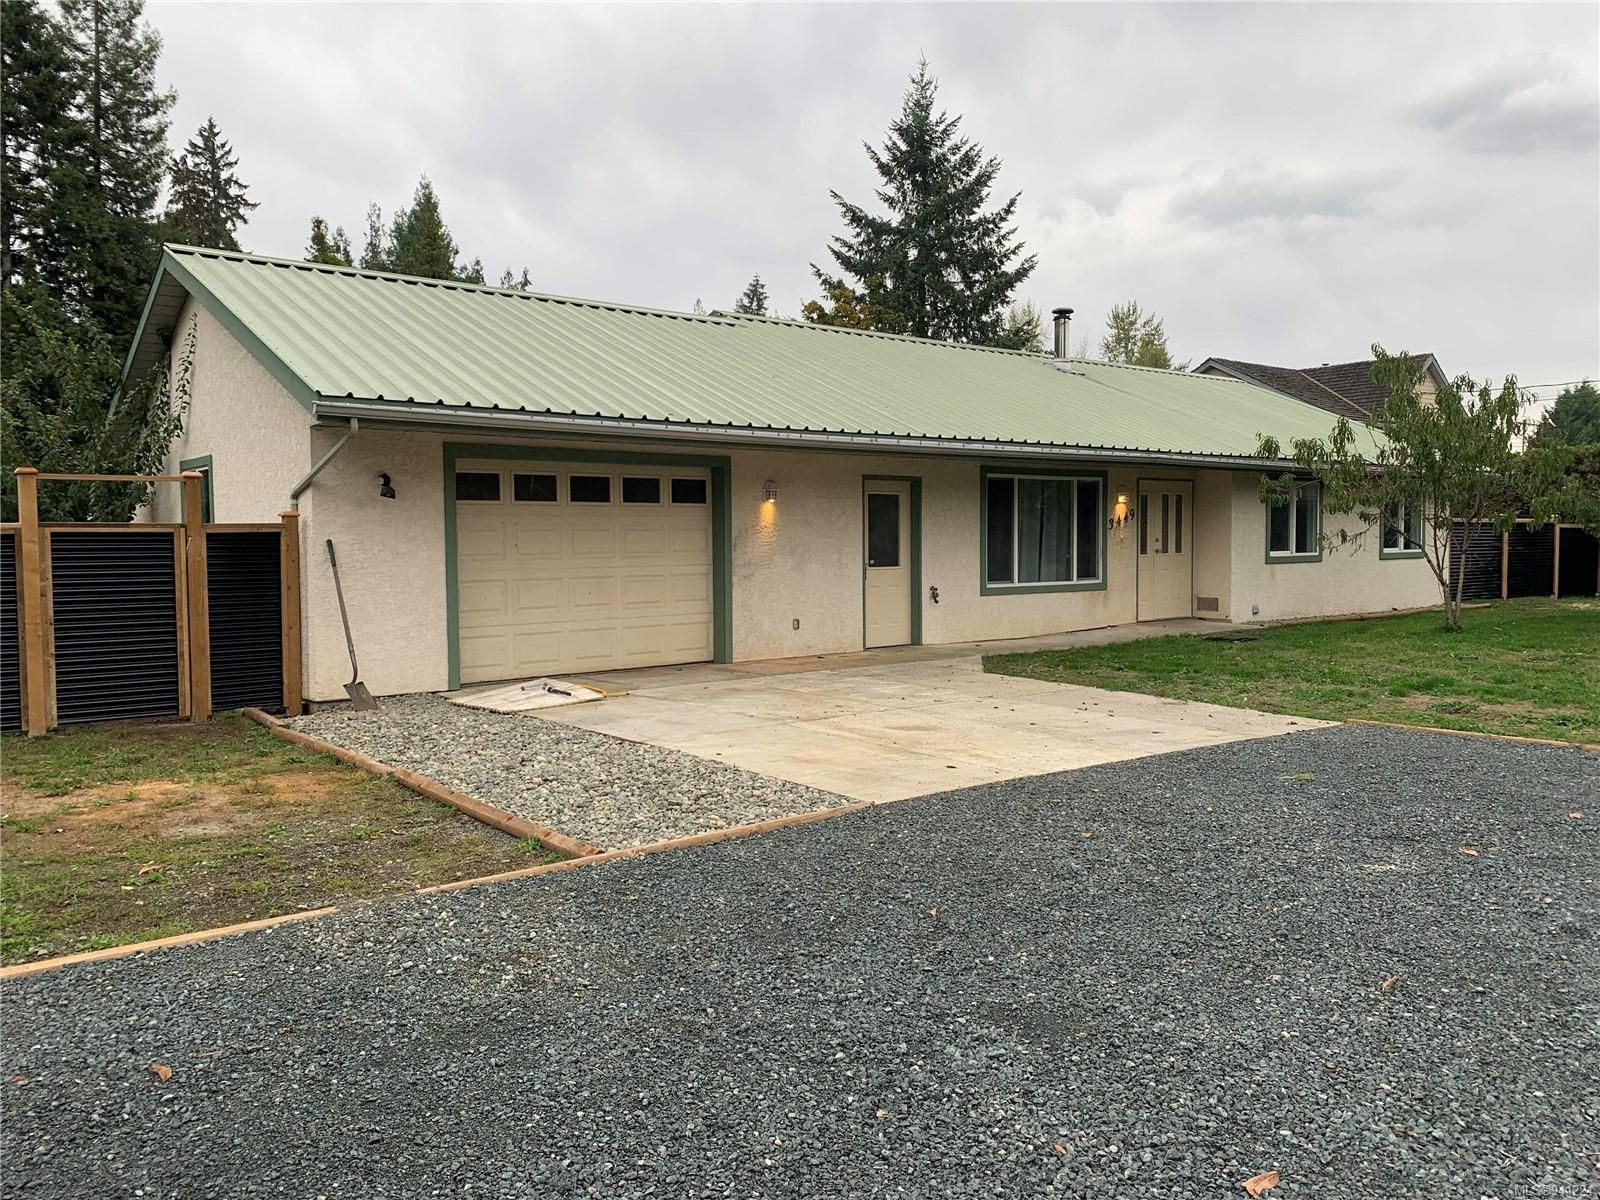 New property listed in CV Courtenay West, Comox Valley